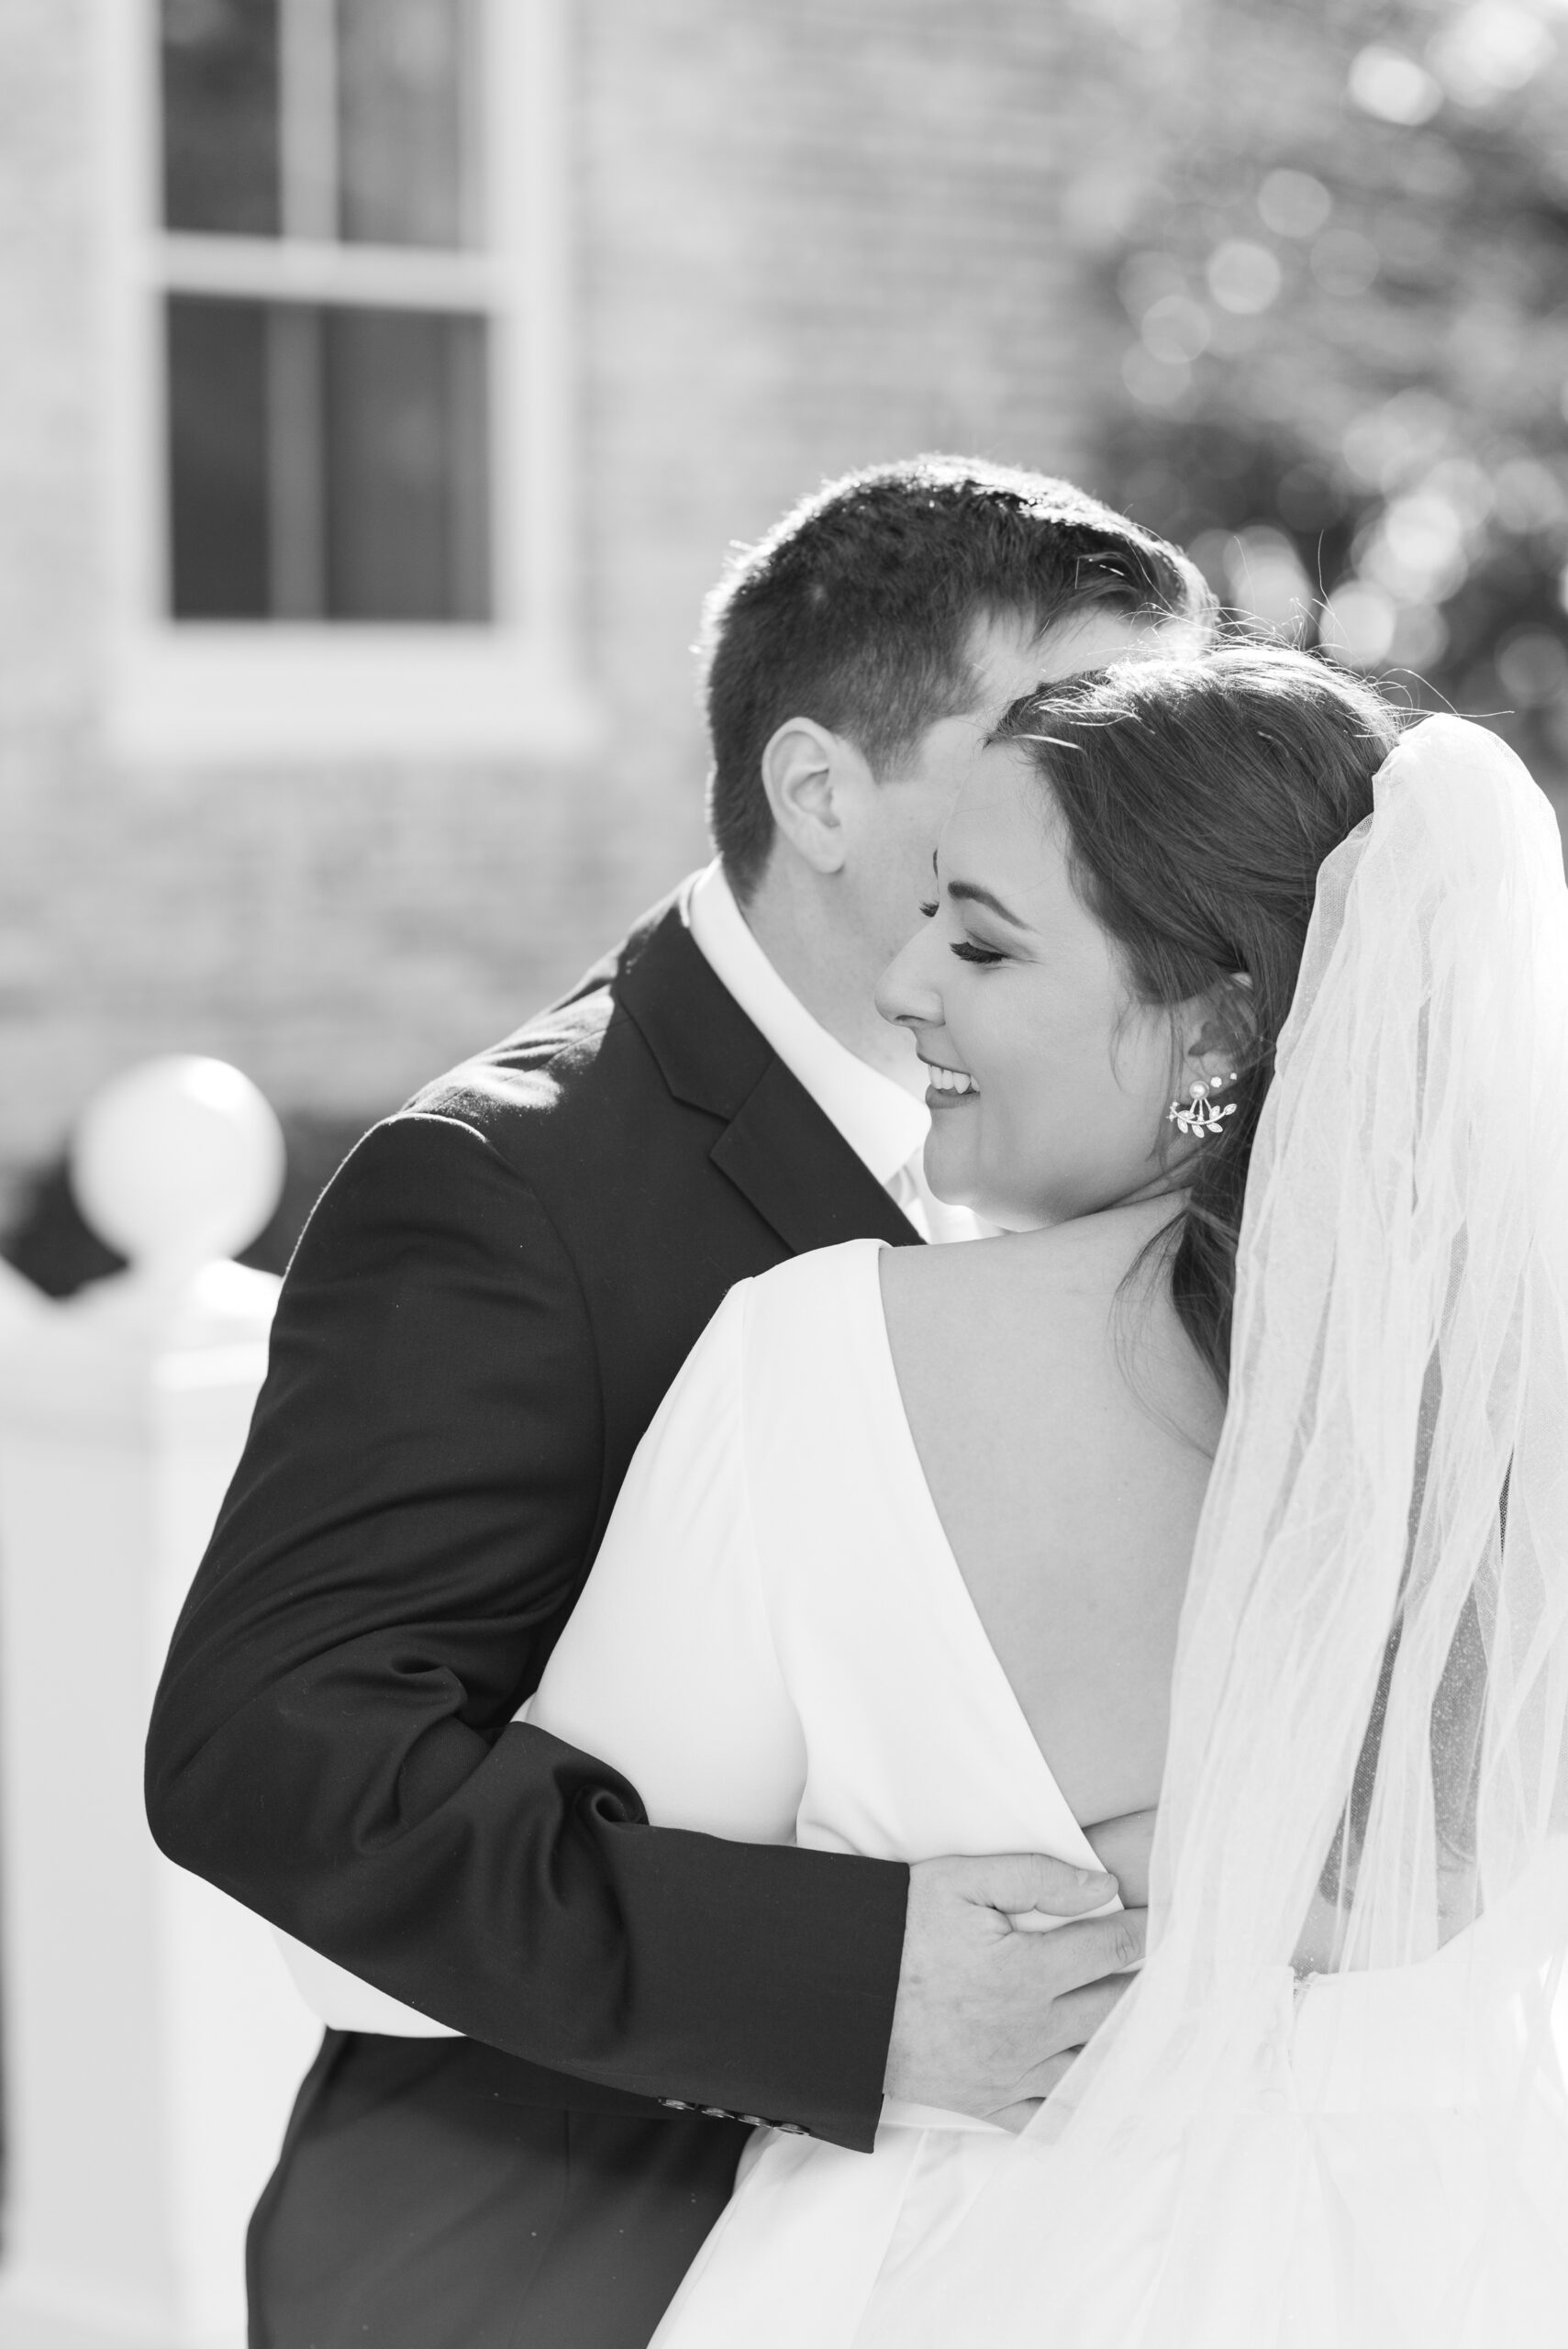 Newlyweds dance in a garden in black and white